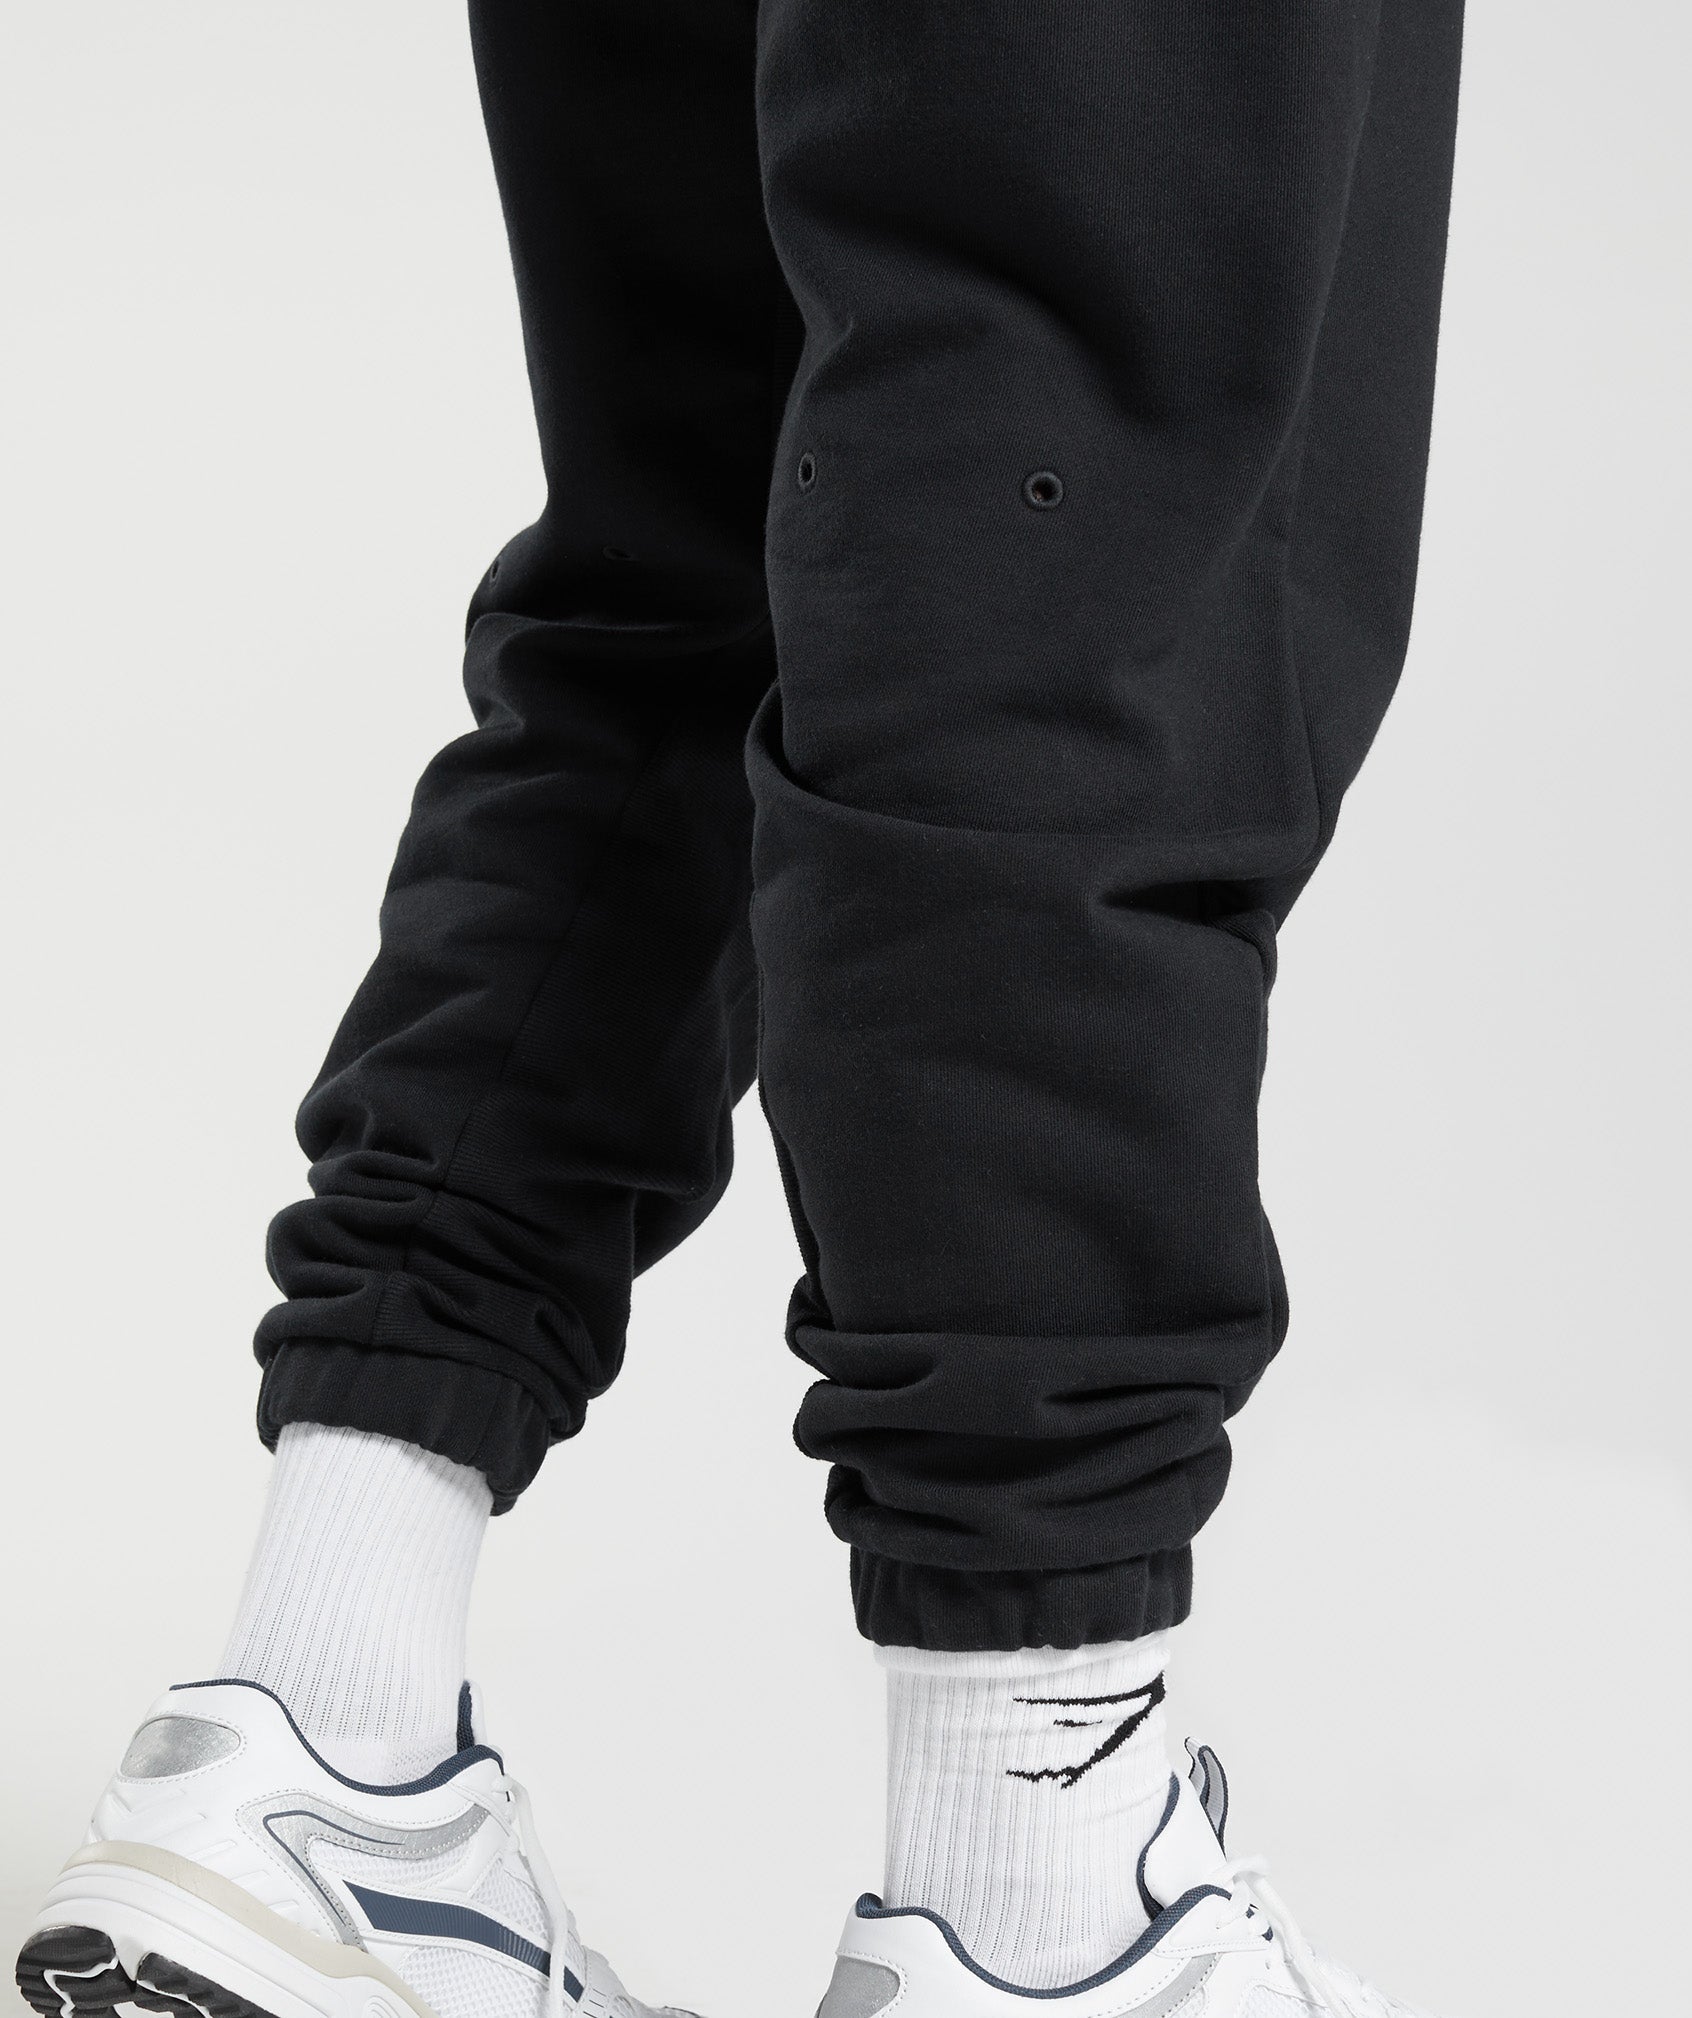 GS10 Year Joggers in Black - view 5